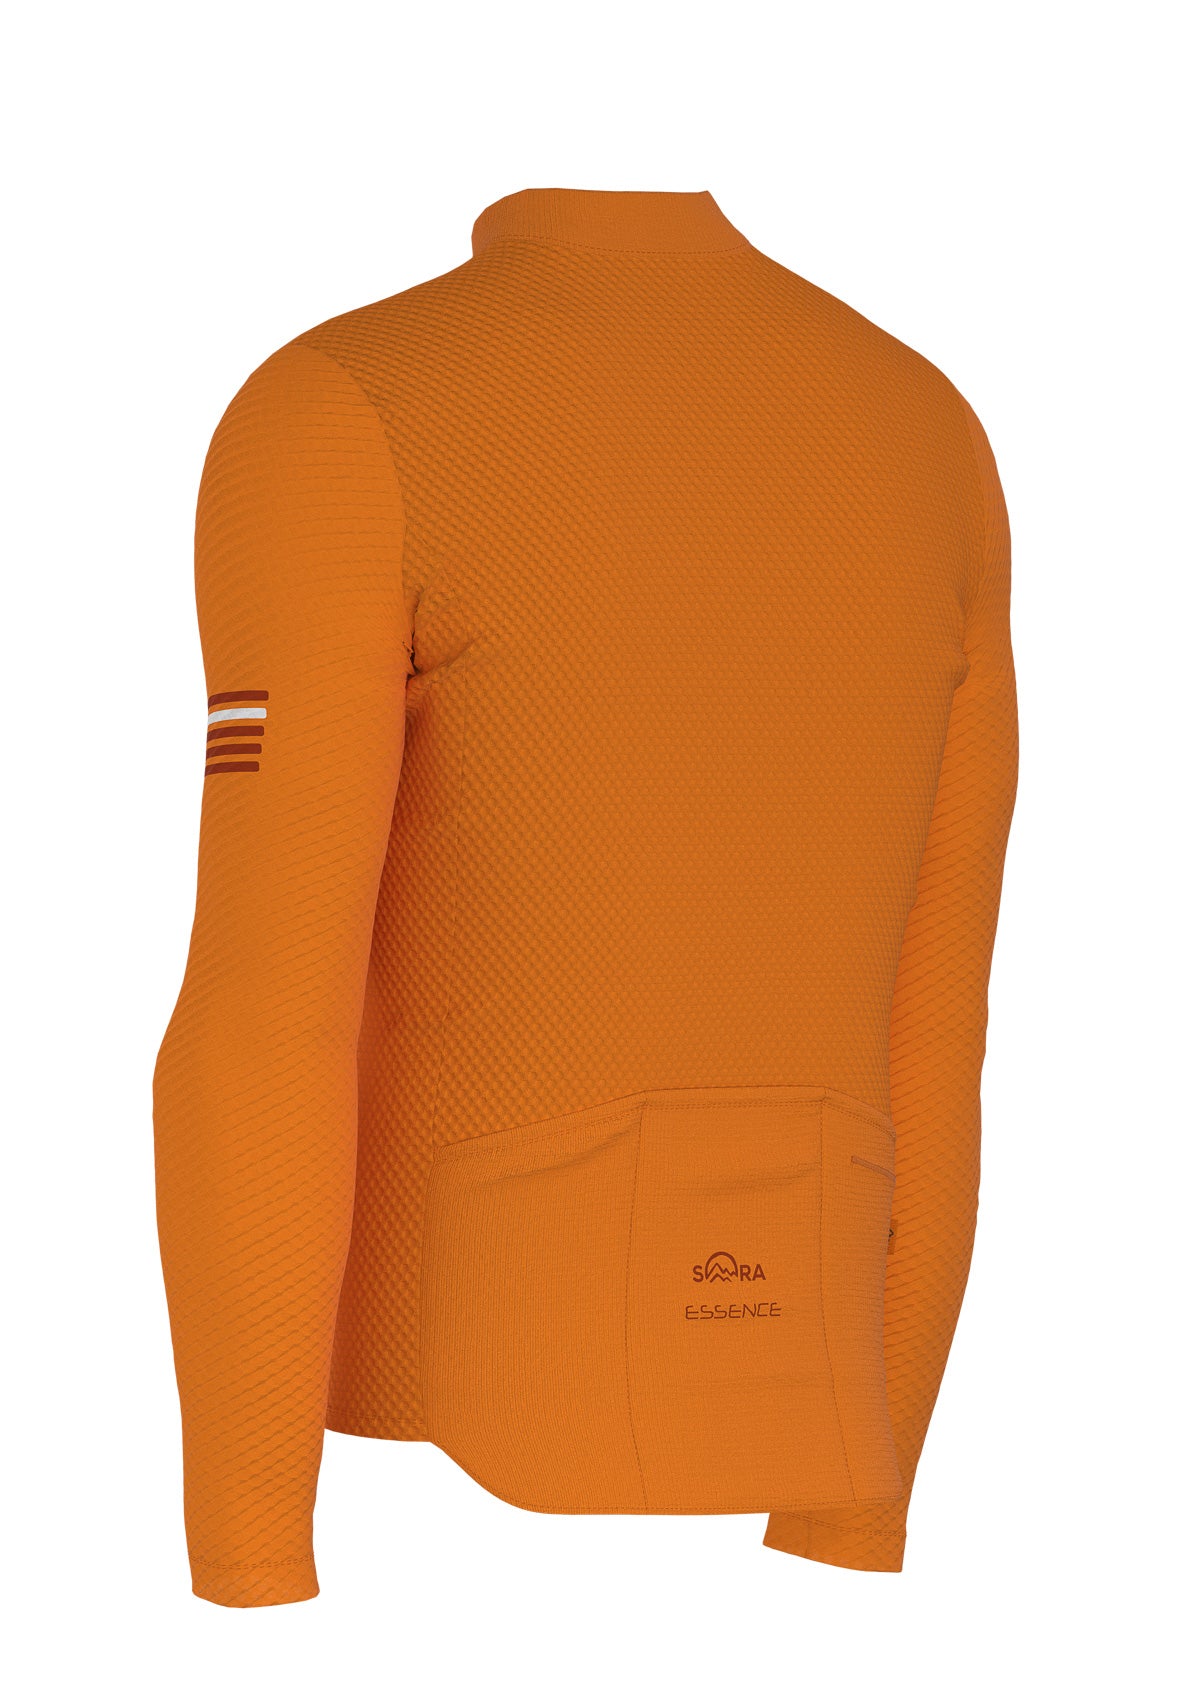 Essence Boost long sleeve cycling jersey